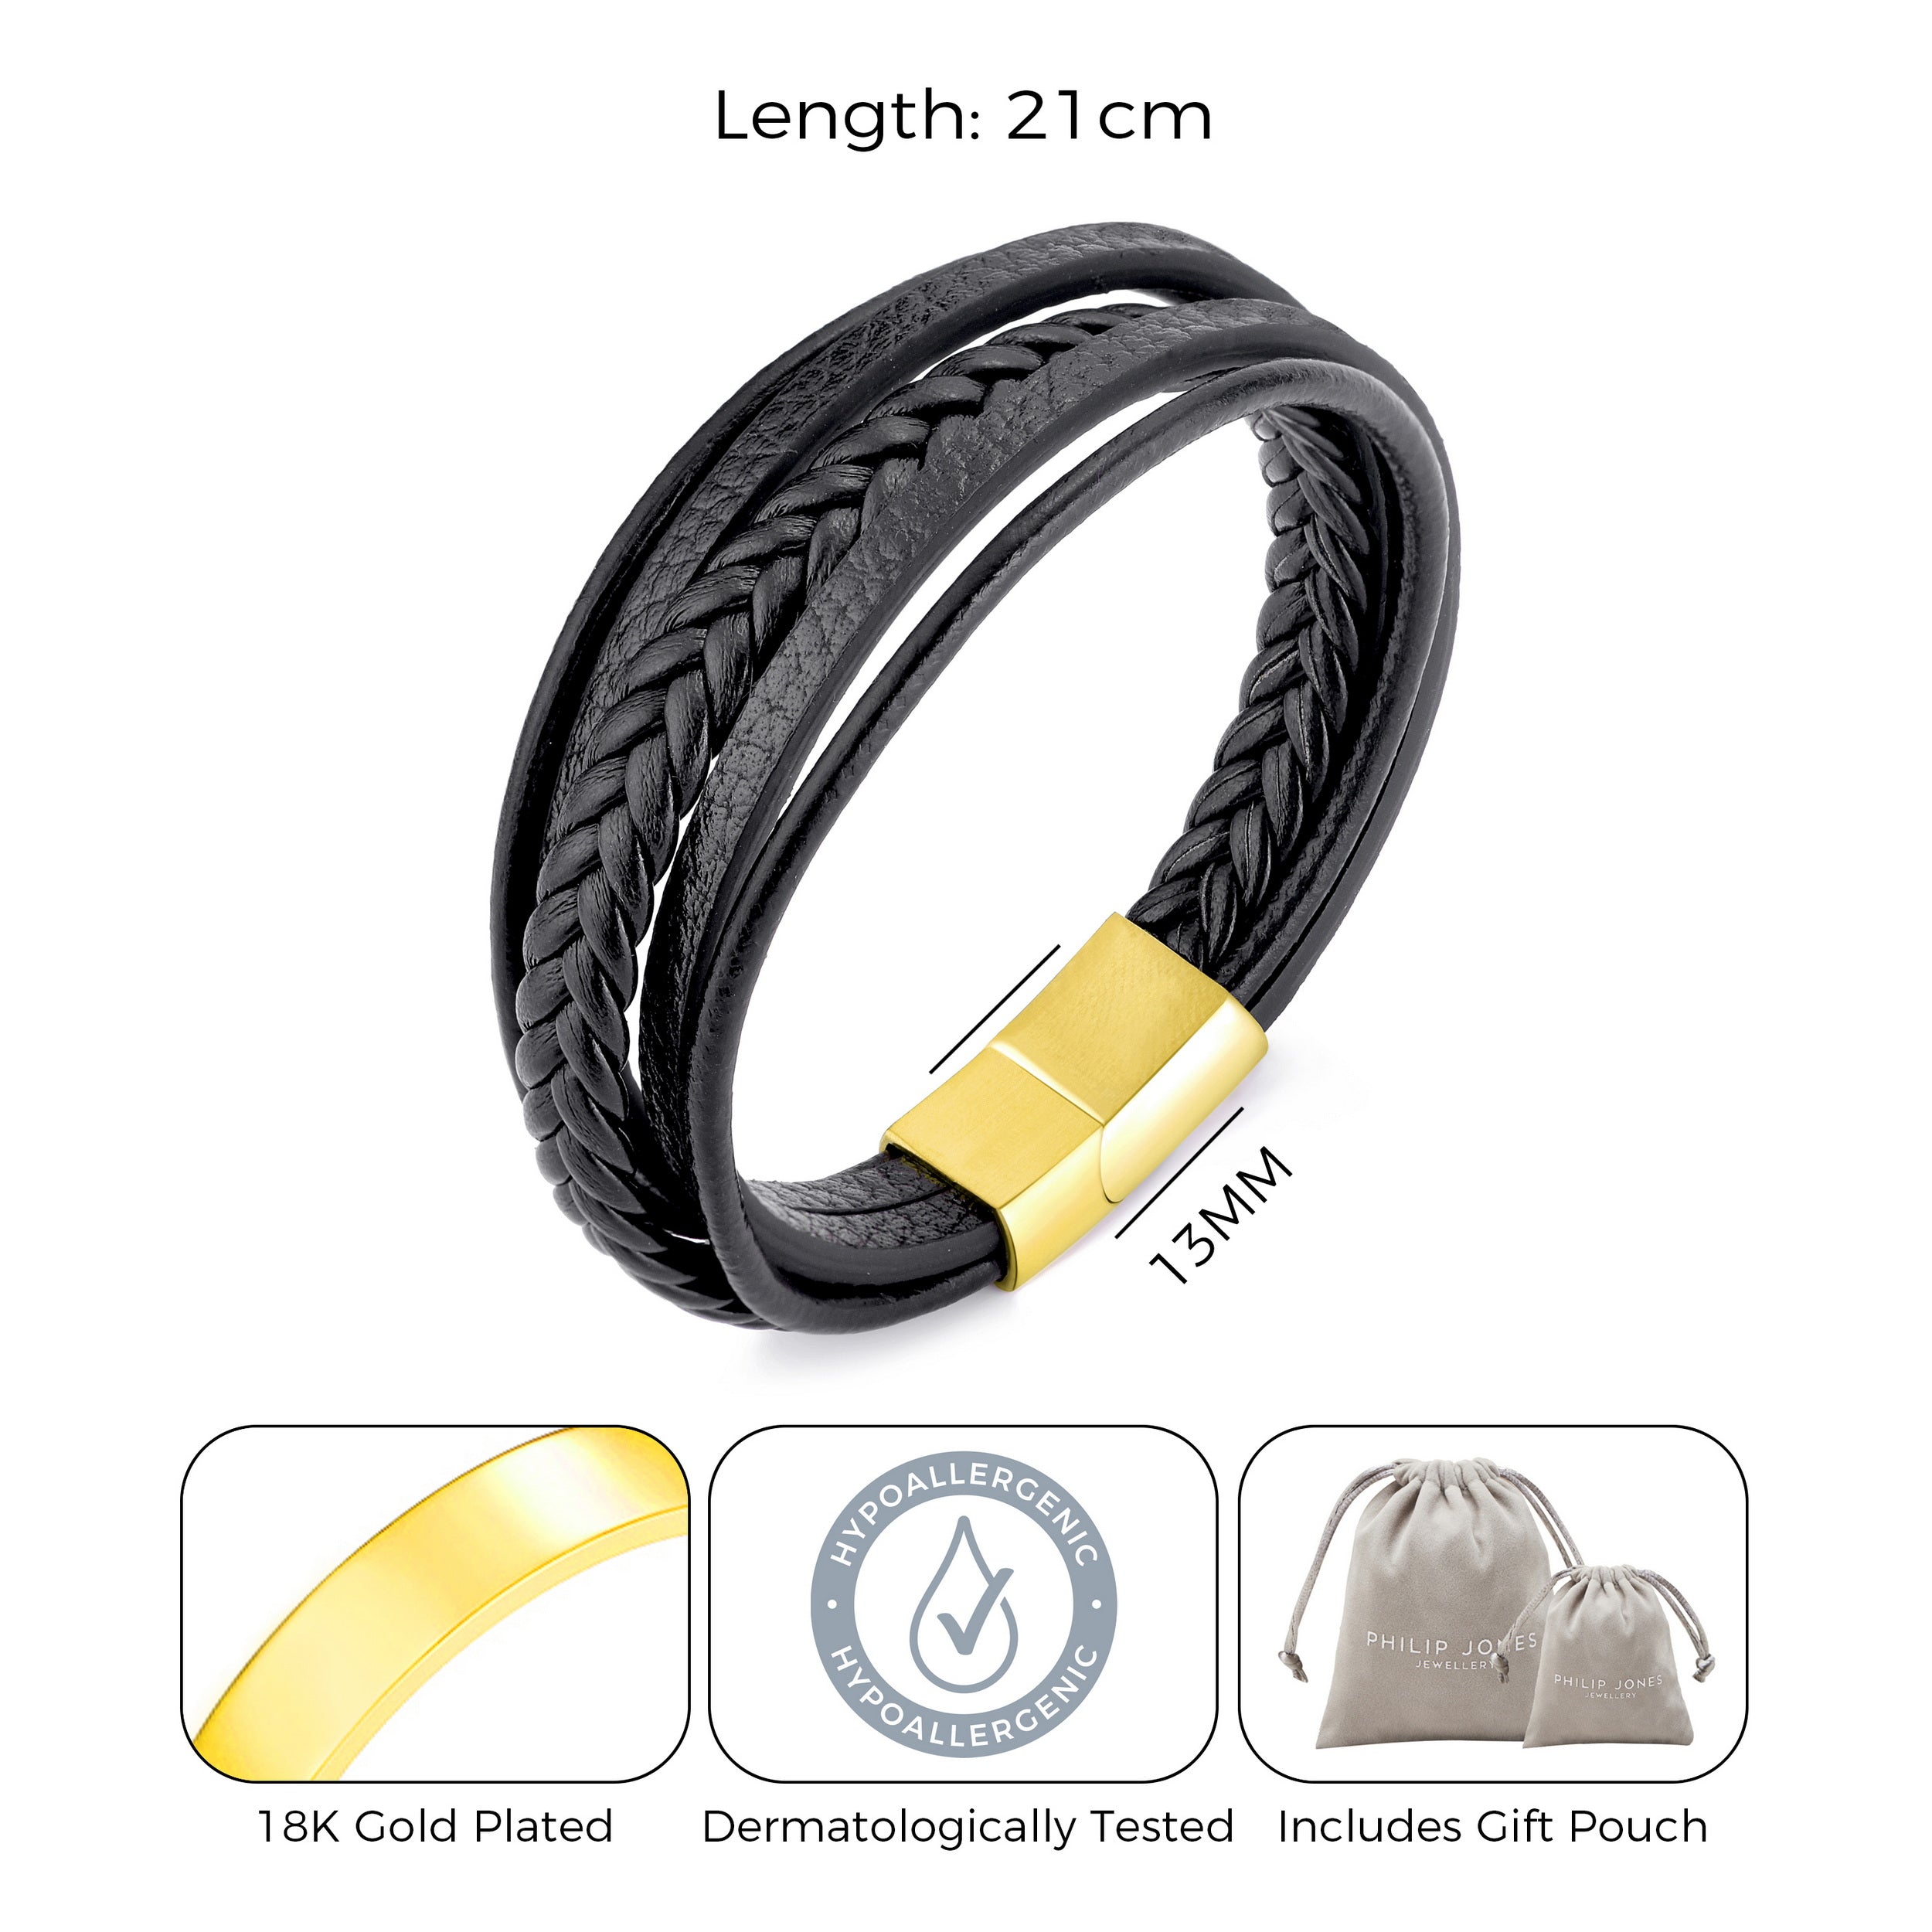 Men's Genuine Black Leather Bracelet with Gold Plated Stainless Steel Clasp